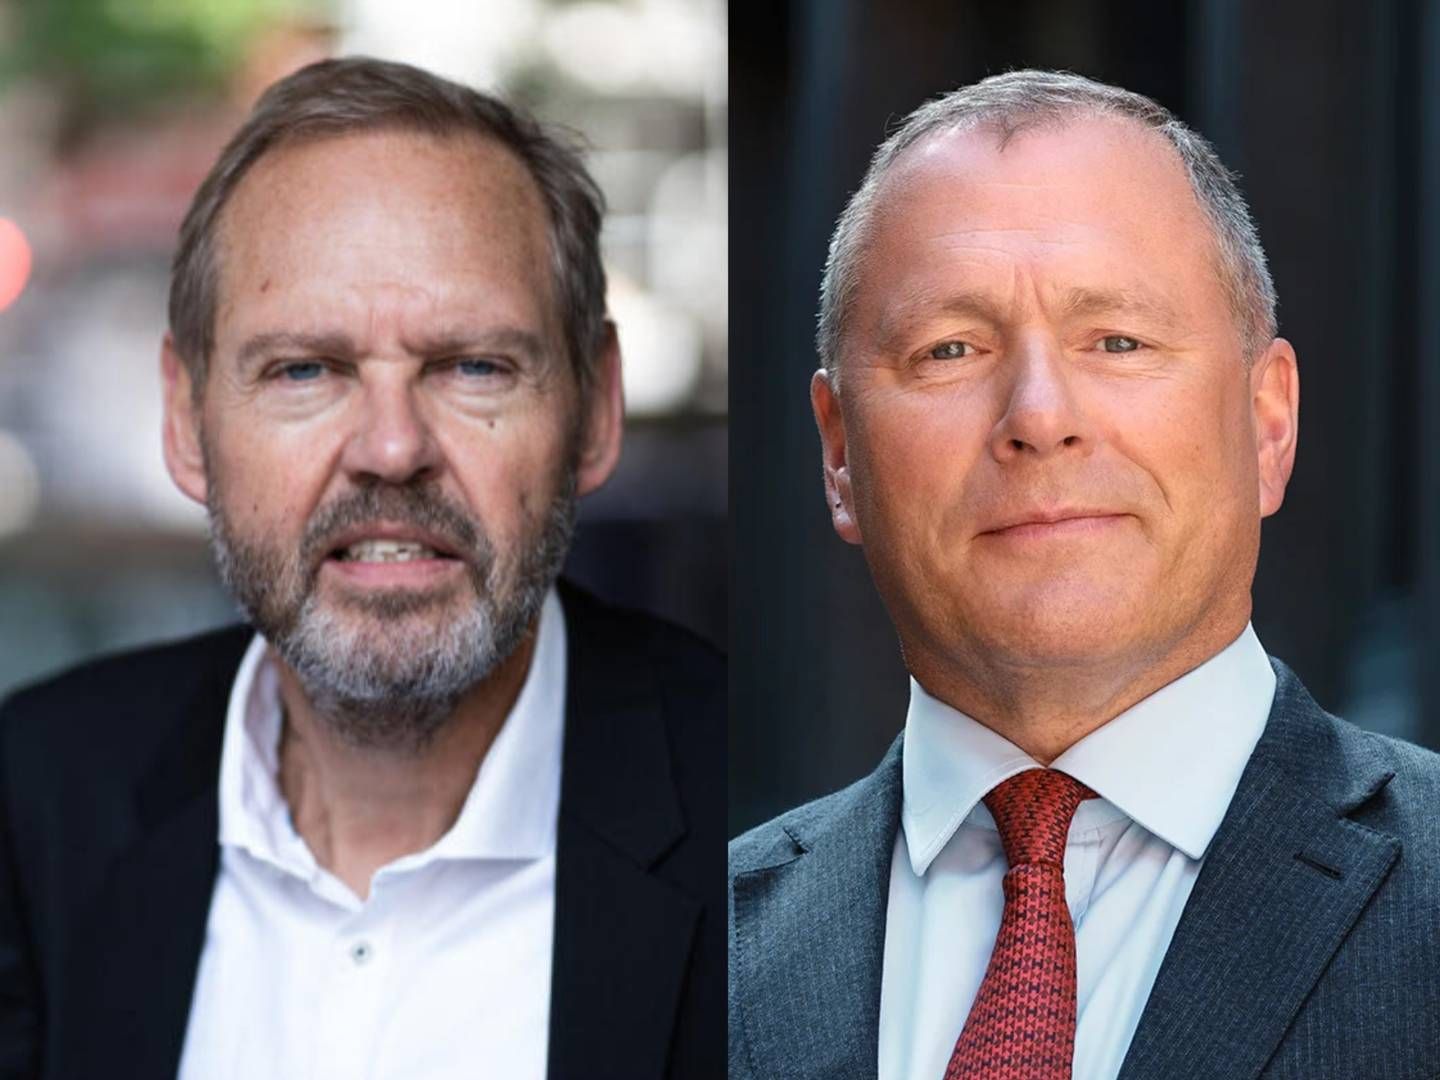 Flemming Højbo (right) writes analyses for AMWatch about the Nordic asset and wealth management sector. In this piece, he discusses the latest refusal of Norway's government to follow the request of the oil fund CEO, Nicolai Tangen, to invest in private equity. | Photo: PR / Jan Bjarke Mindegaard / NBIM